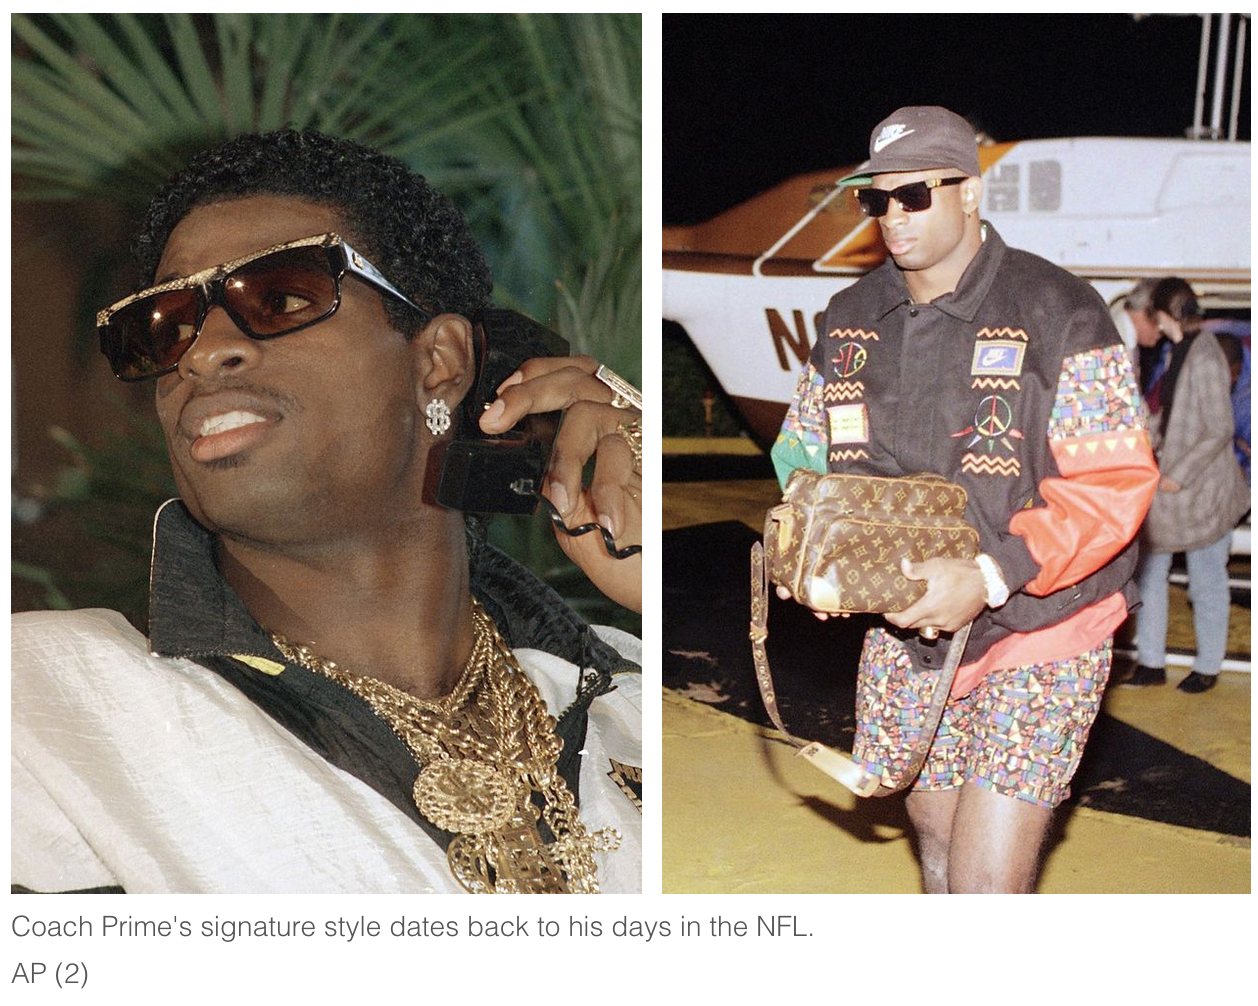 Ultimate Resource On Deion Sanders And His Re-Writing College Football’s New Playbook